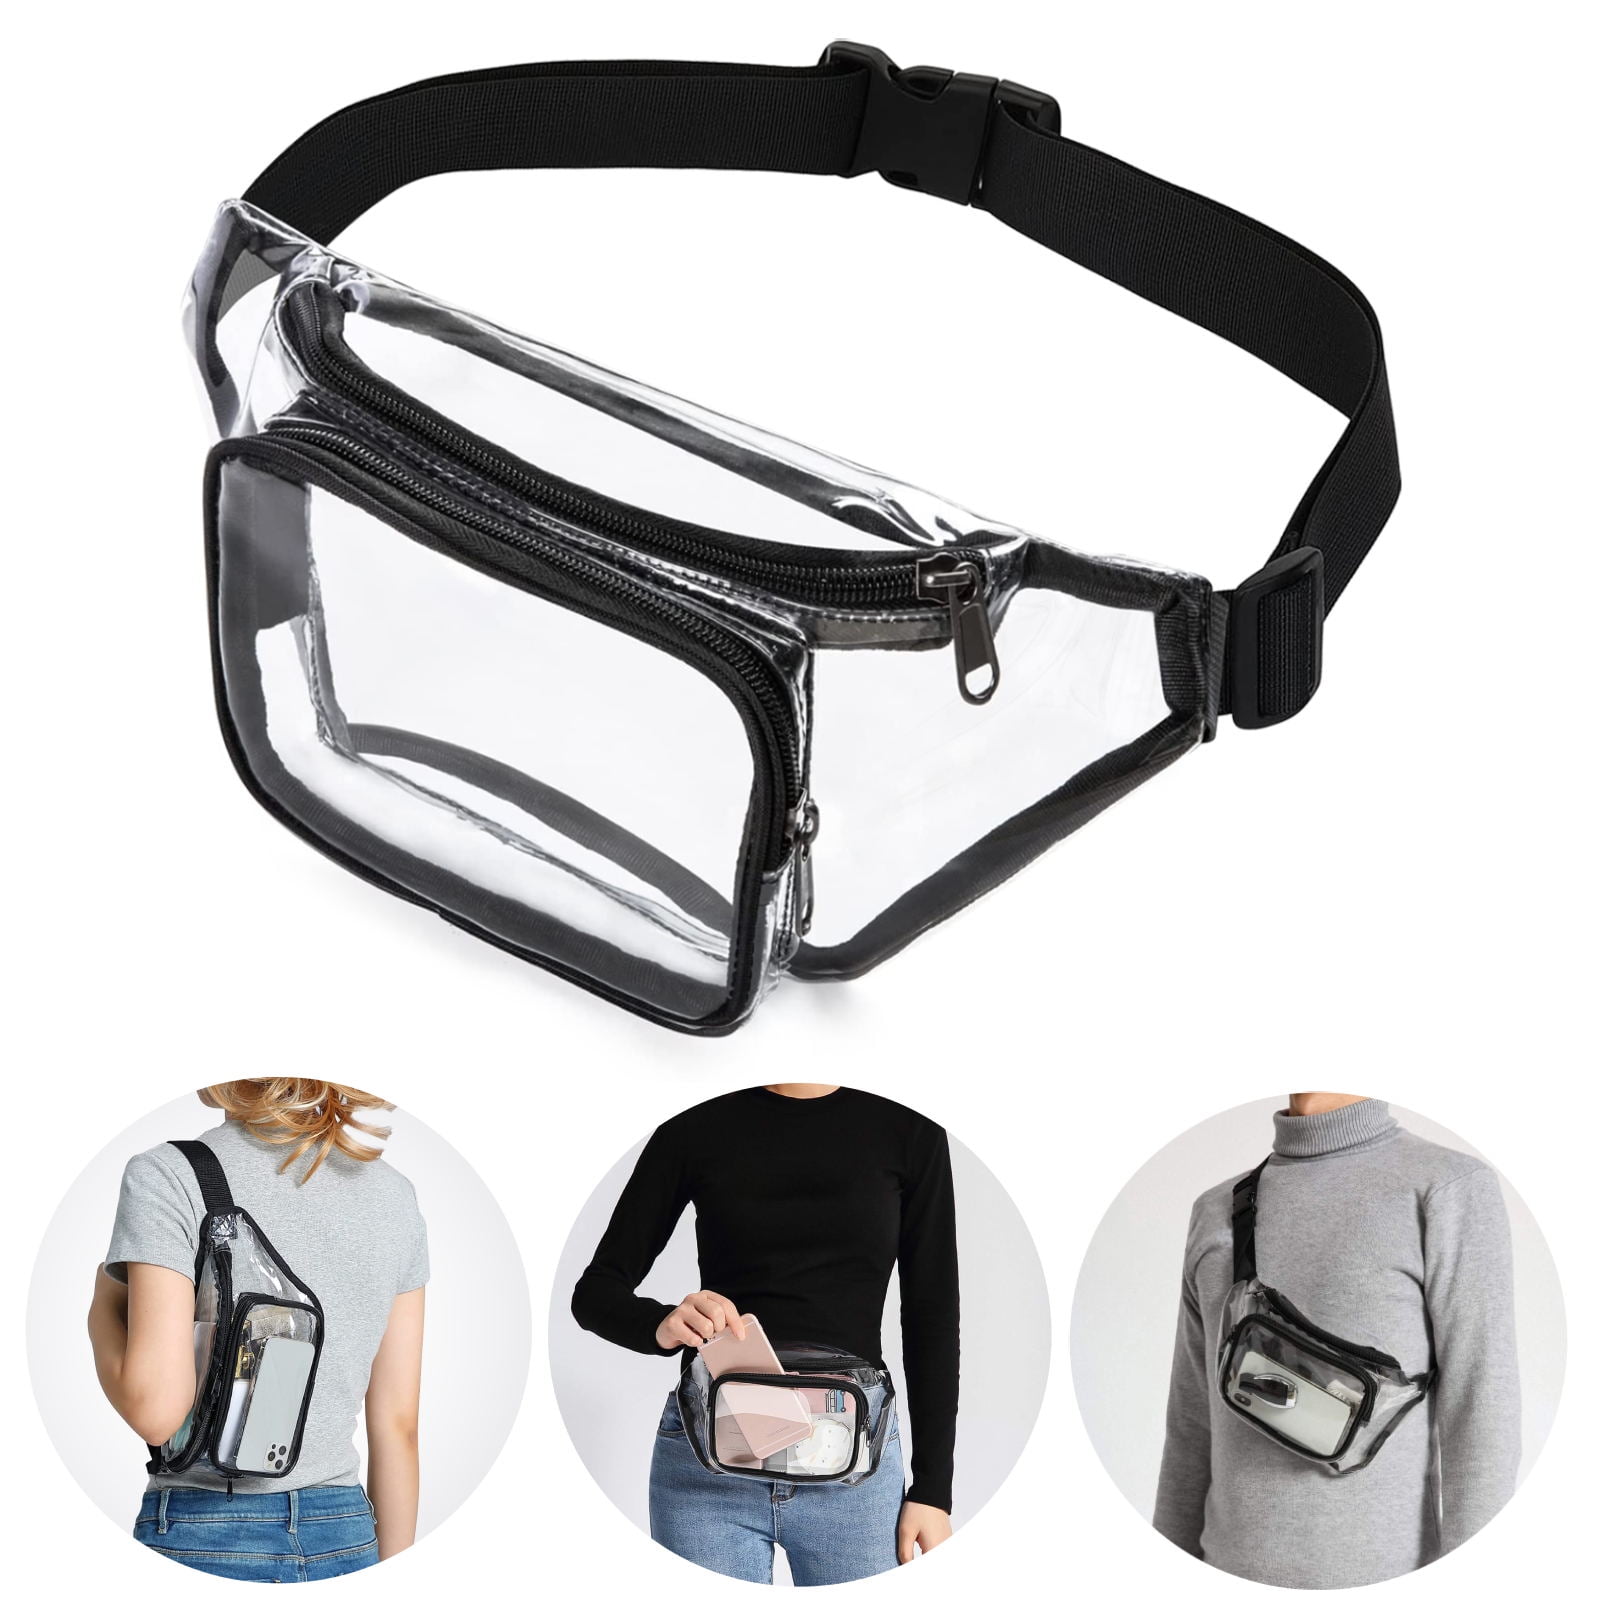  Clear Fanny Pack Belt Bag Stadium Approved for Women